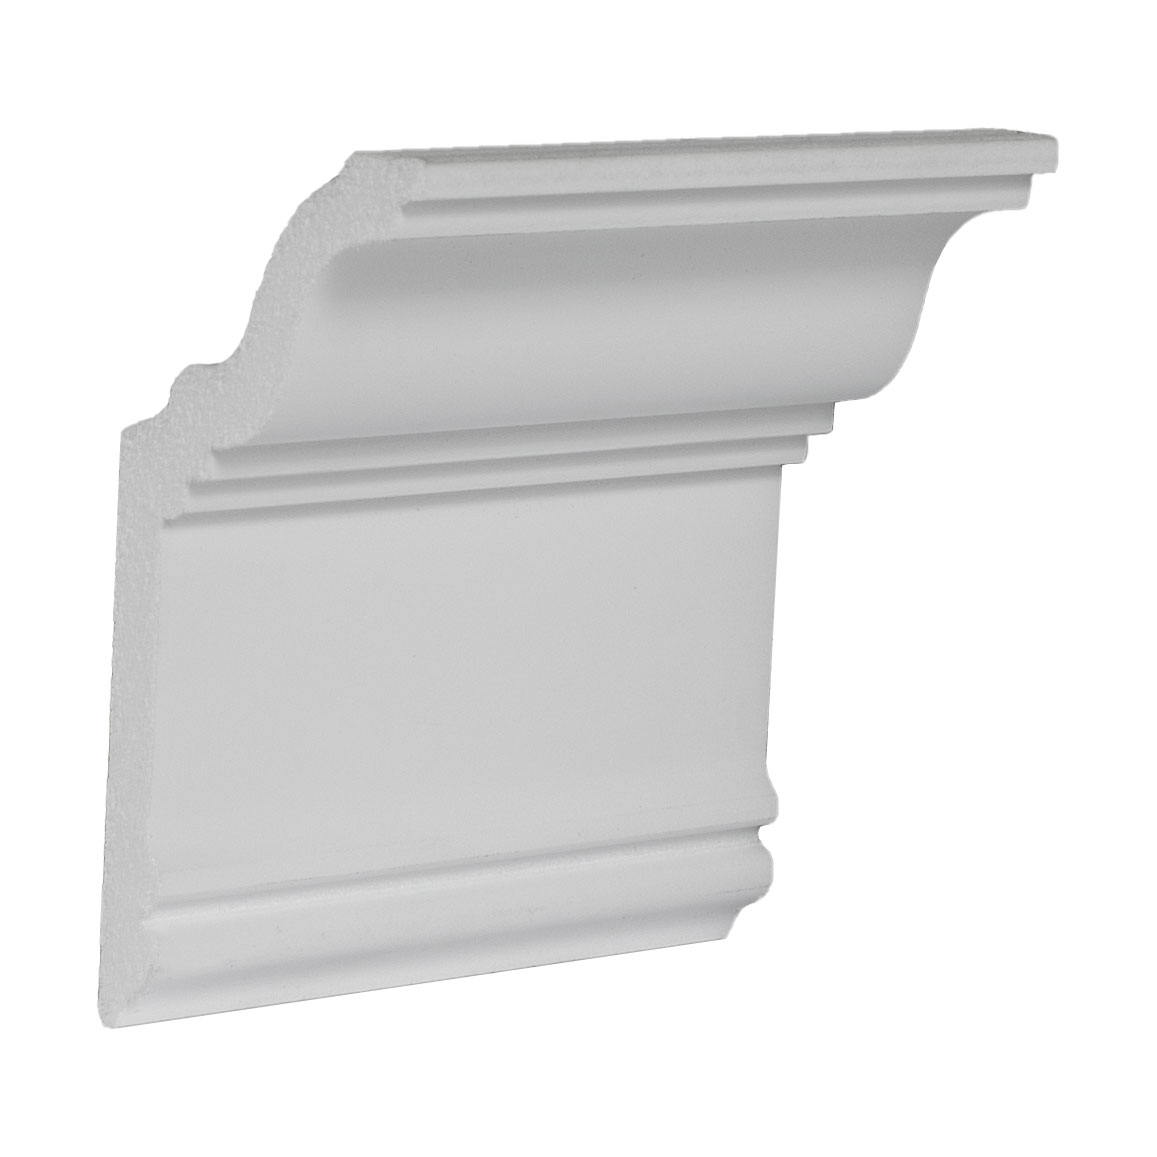 1 Sample Piece S-650113 Profhome Sample Cornice Moulding Decorative Moulding Length Approx 10 cm